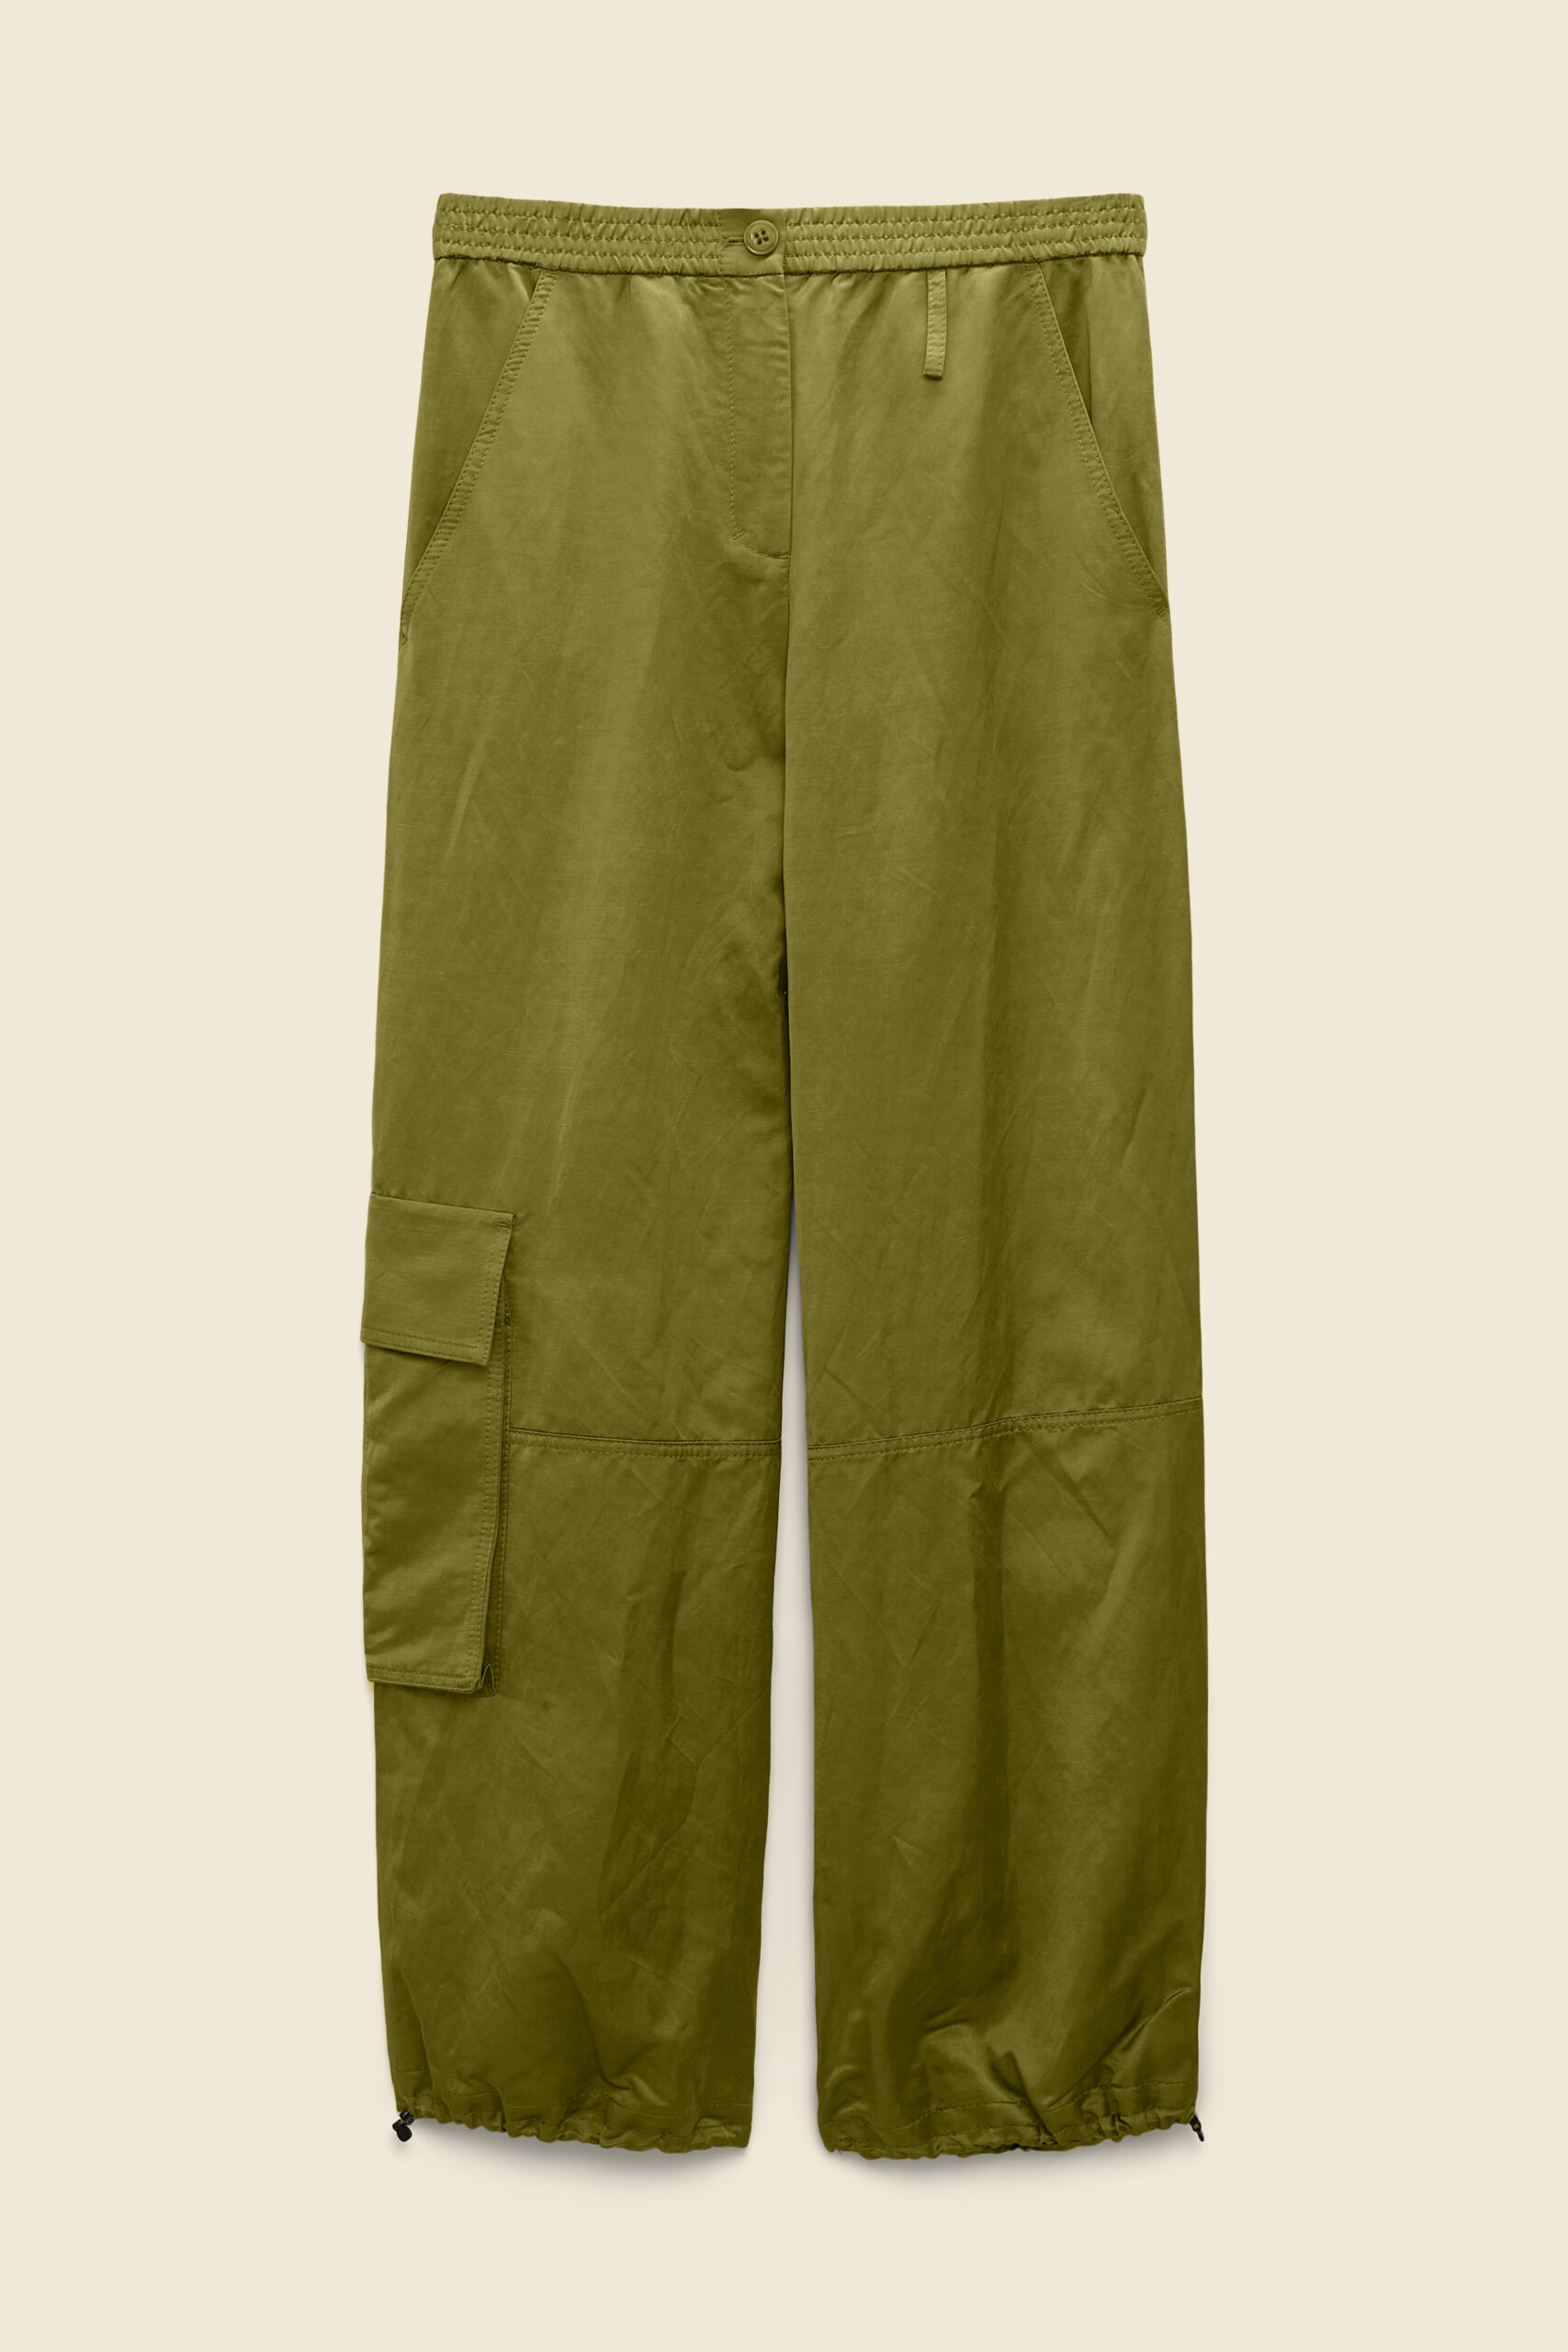 Dorothee Schumnacher Slouchy Coolness pants